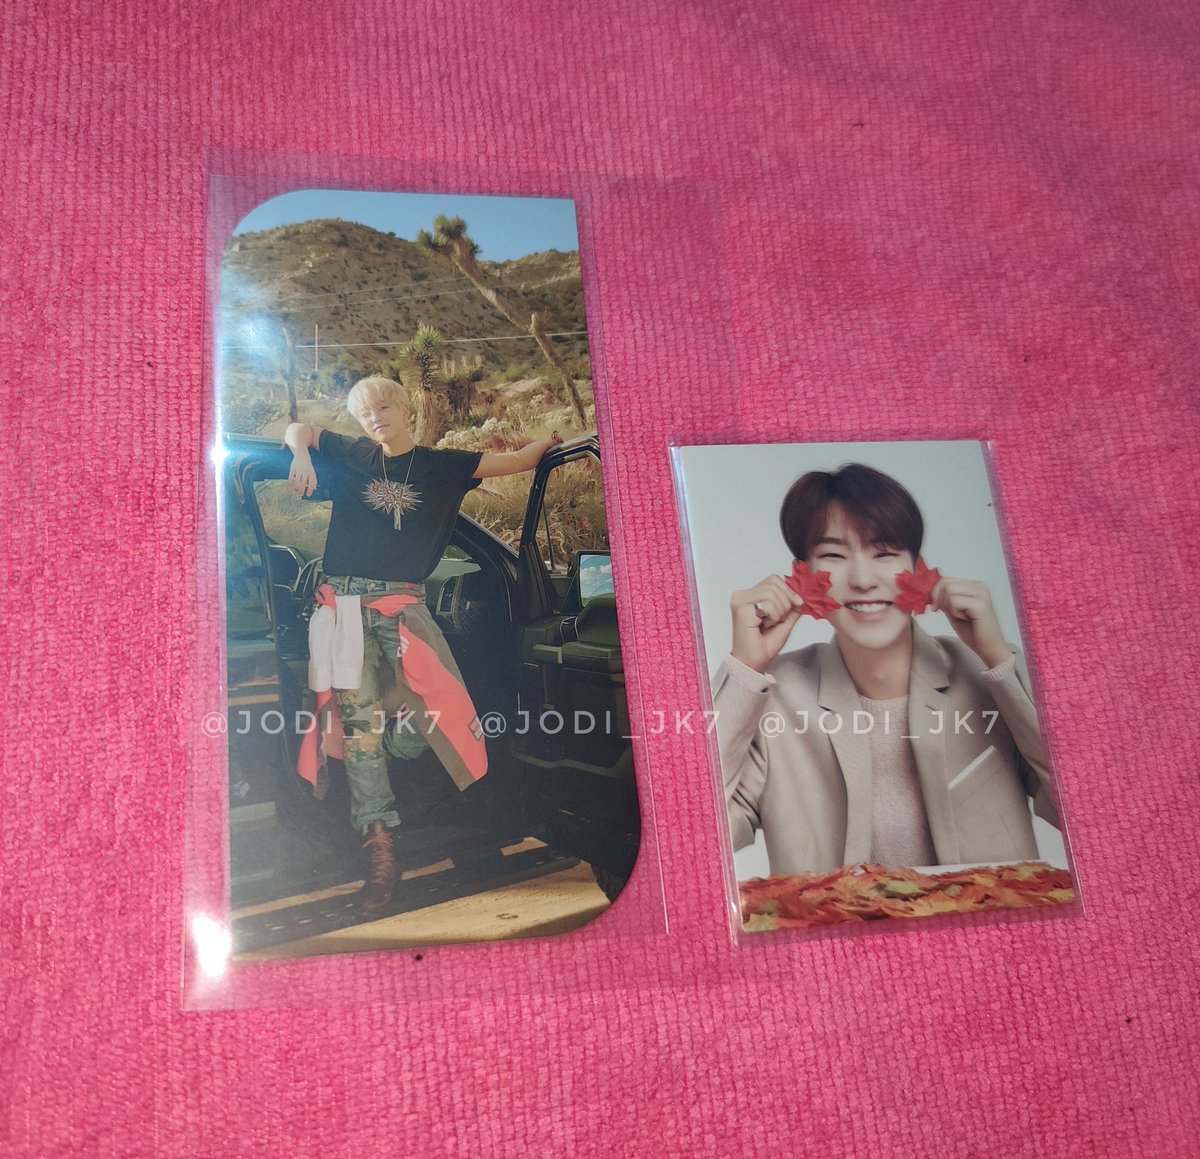 HOSHI SET 1 - PHP 280Onhand3 days reservationmop: gcash, bpi, mbtcmod: ggx, sdd, shopee (for shipping only)Reply "Mine"DM me if you have any concerns wts lfb svt seventeen photocards trading cards pc tc papel ph hoshi soonyoung japan jp tc